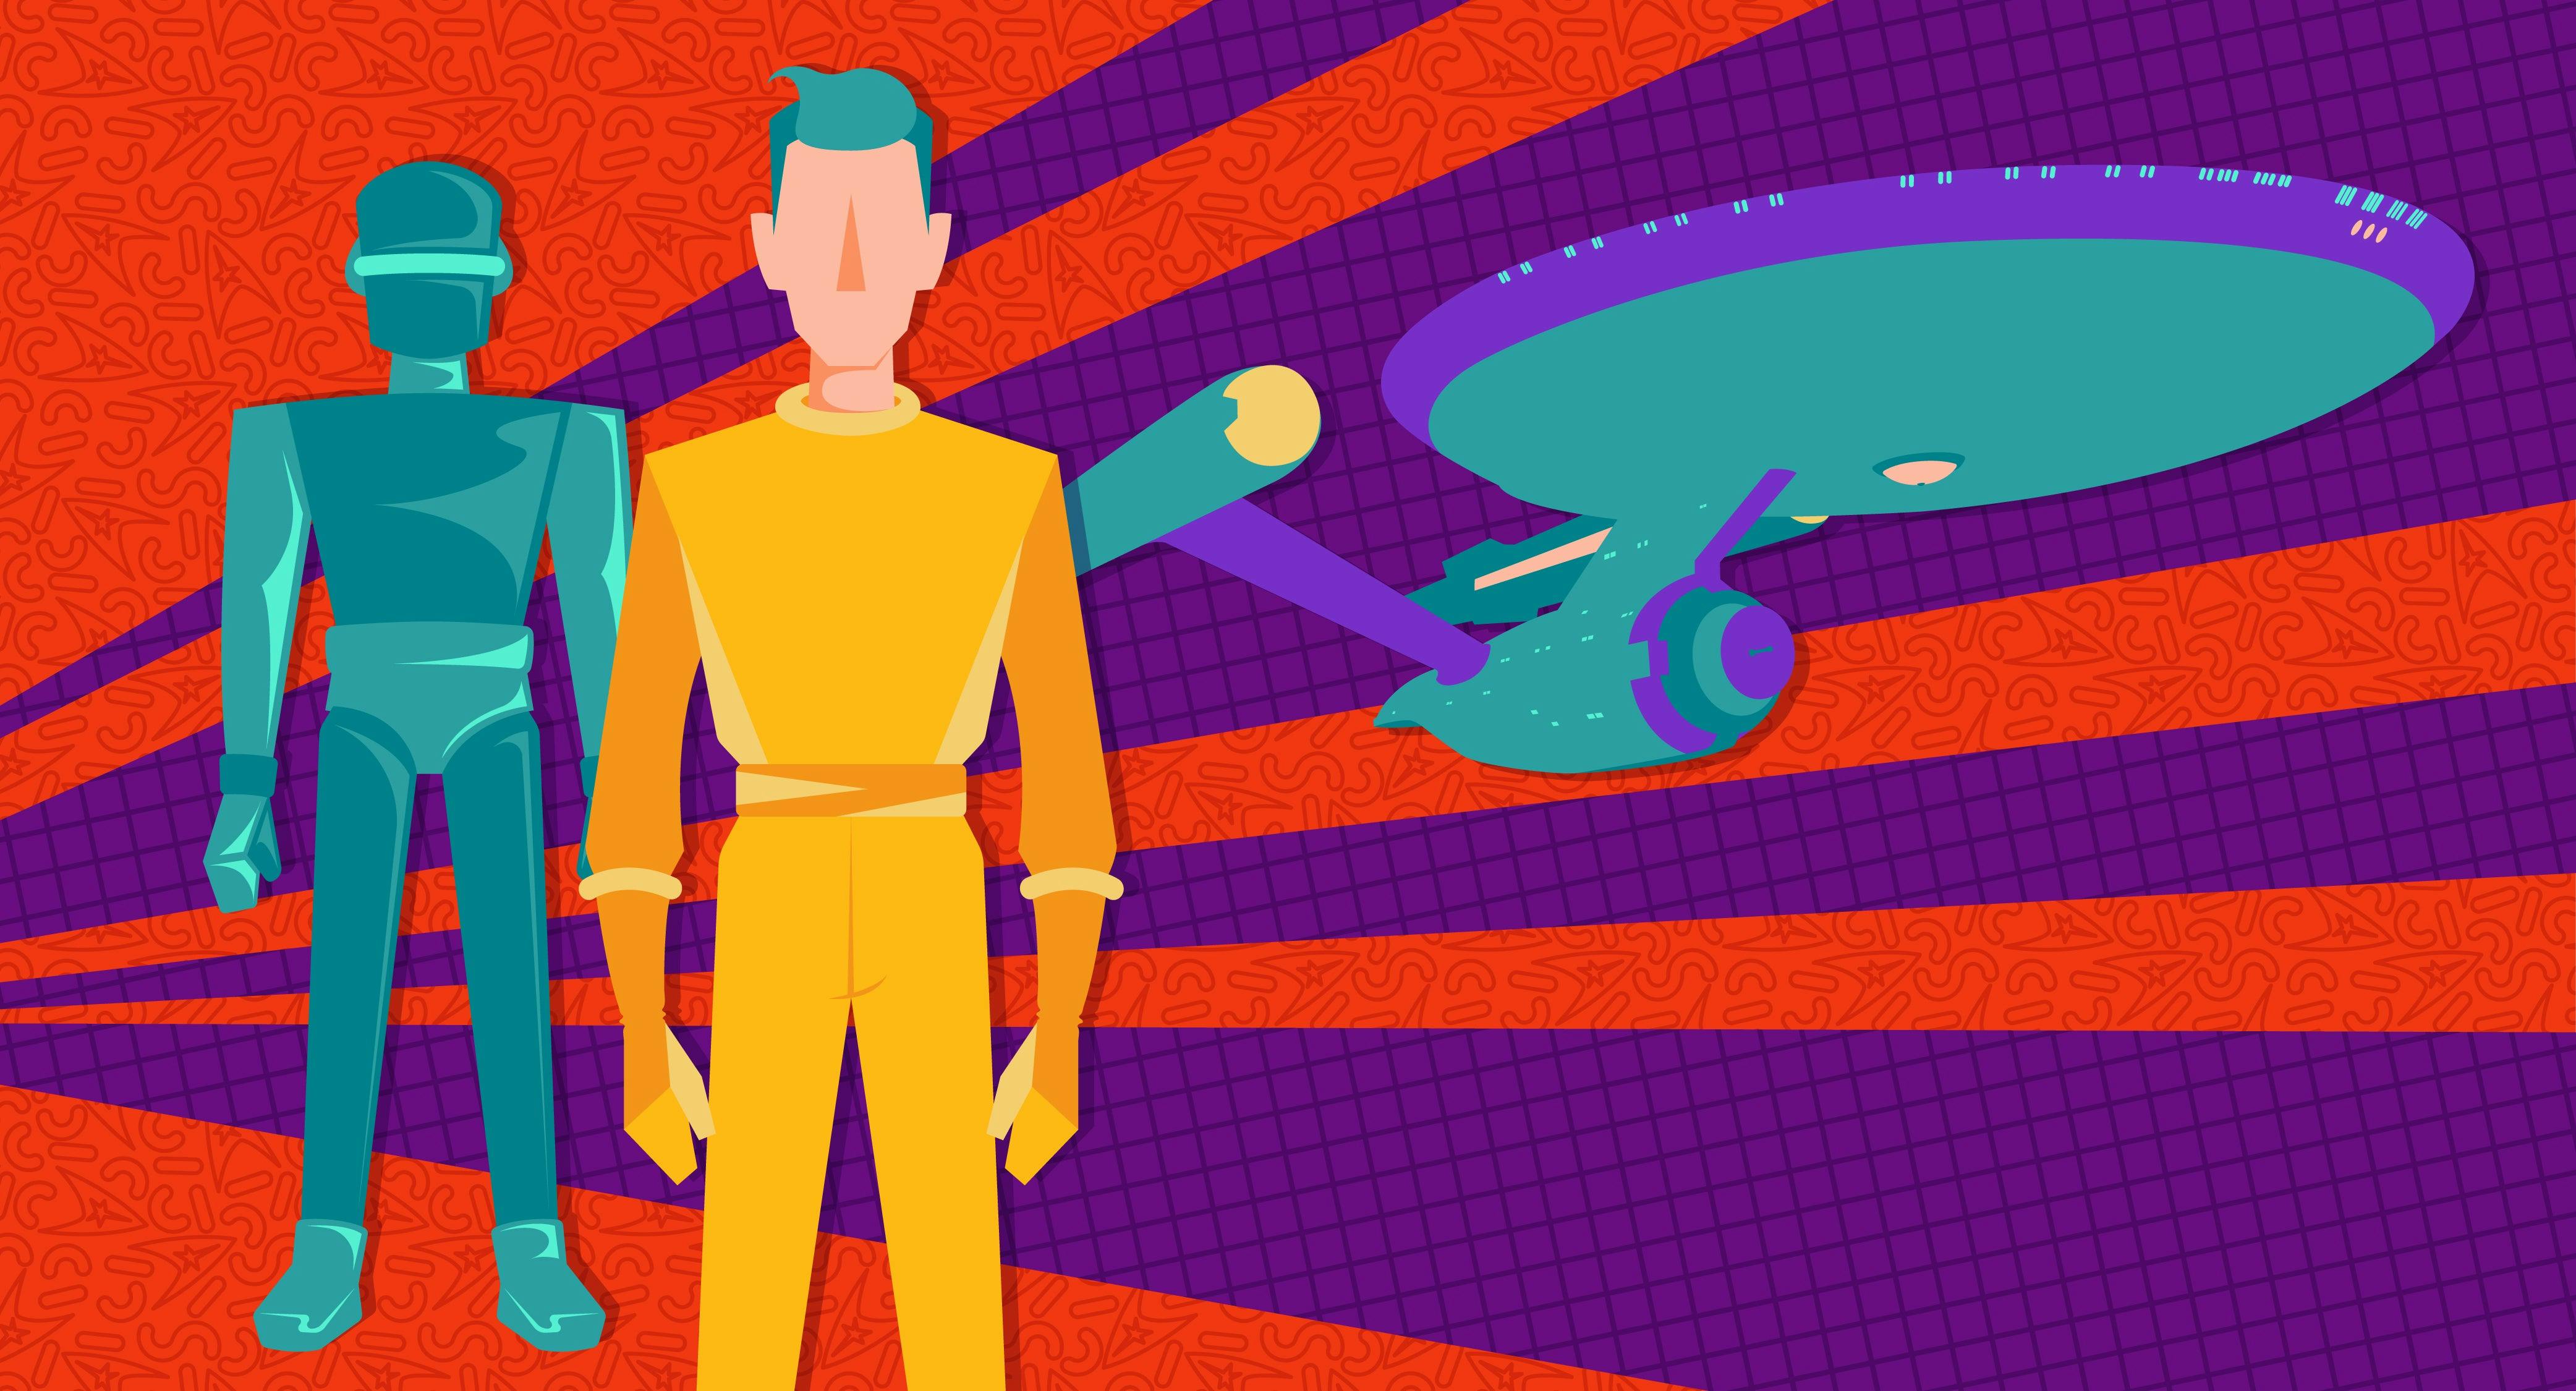 An illustrated version of Gort and Klaatu from the film The Day the Earth Stood Still stand against a red and purple background featuring the Enterprise.